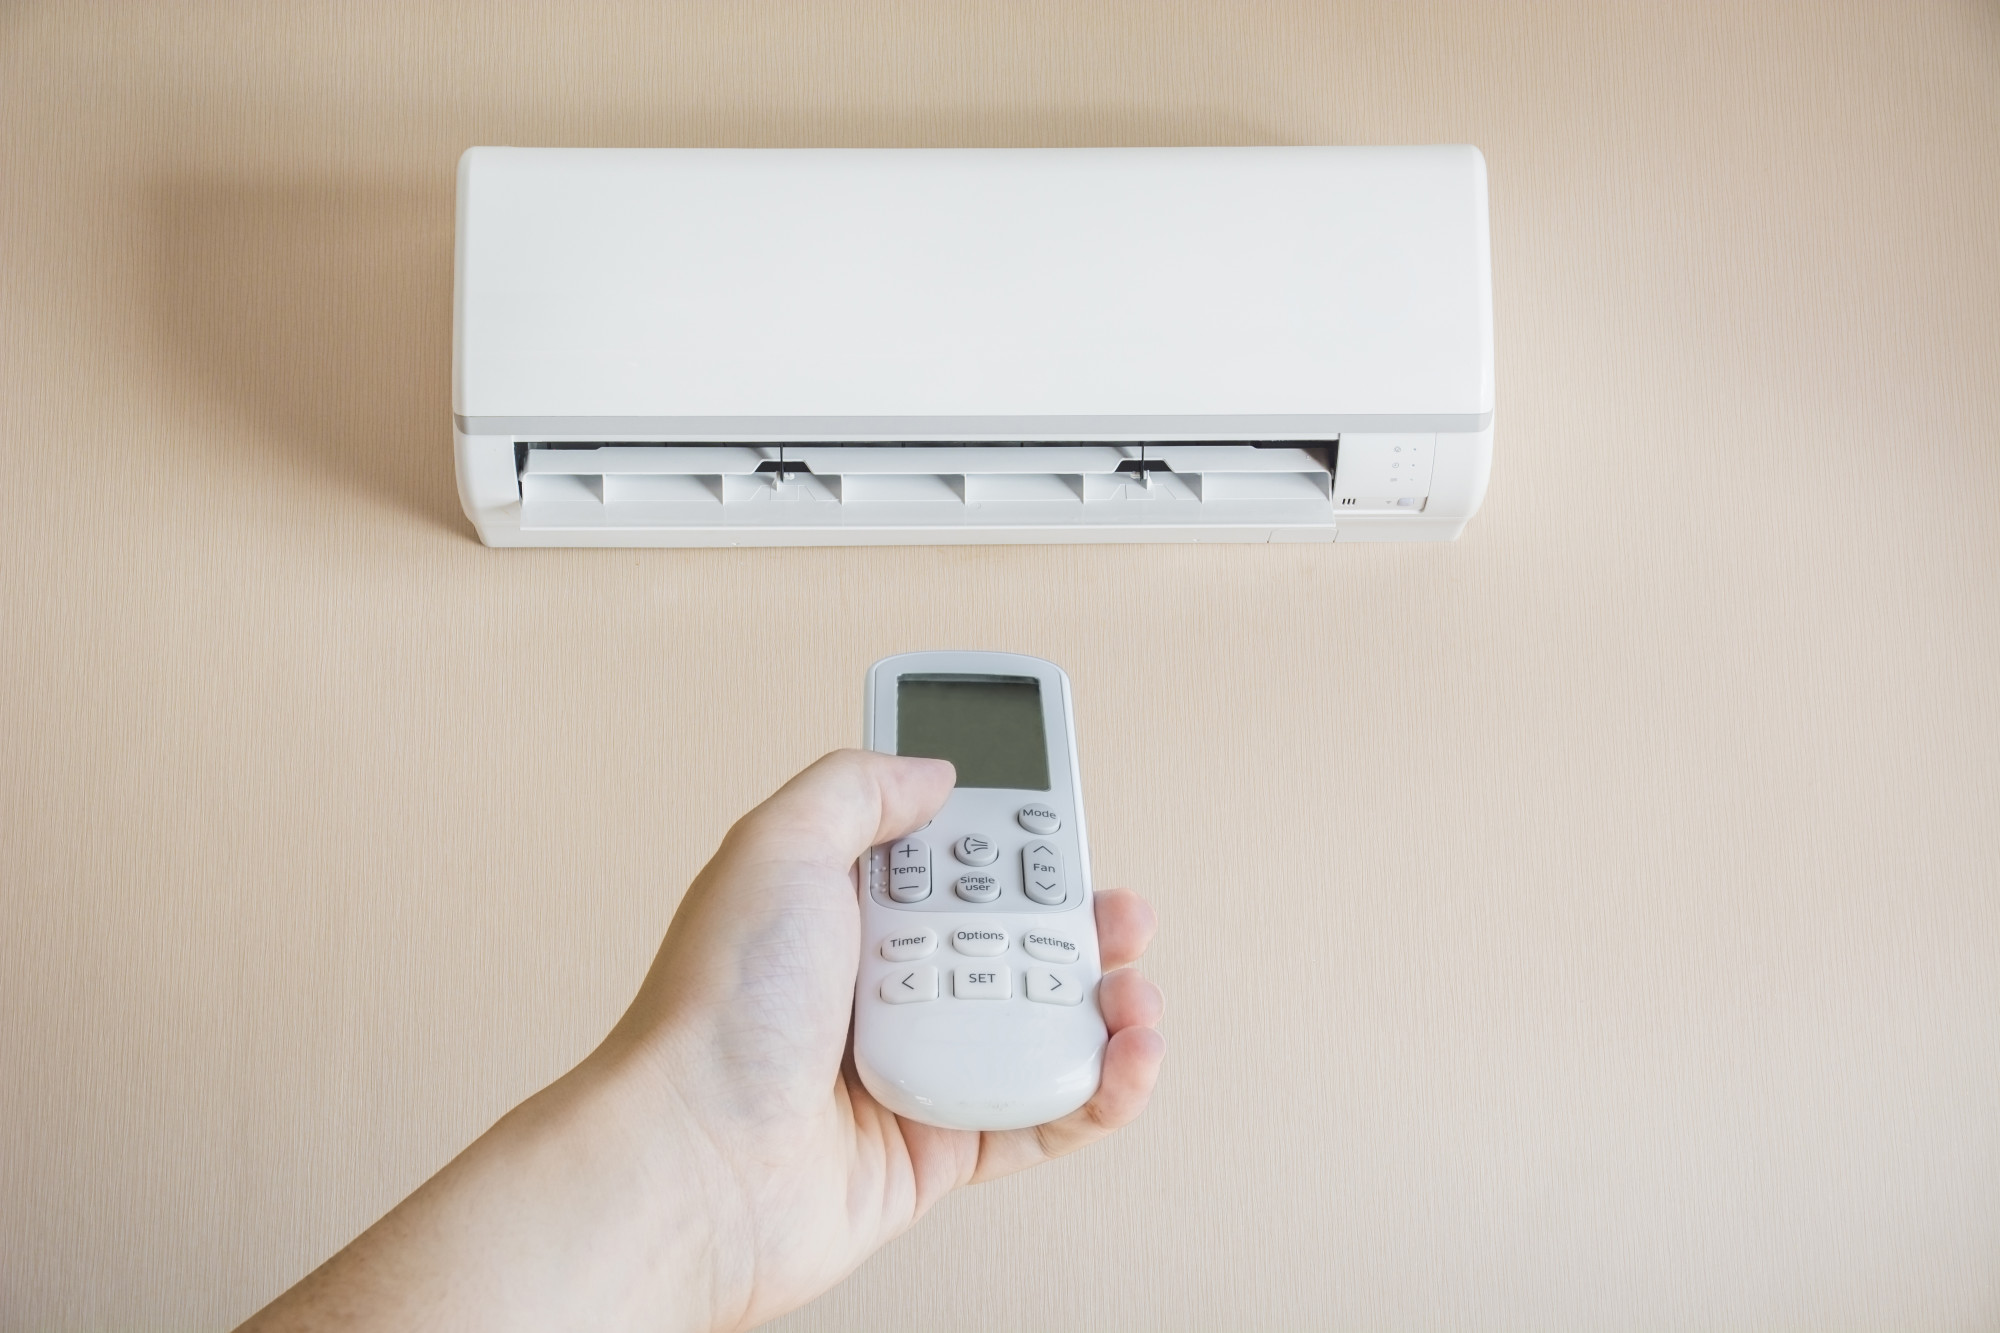 With summer heat just around the corner, we all want working ACs. Learn how to diagnose common air conditioner problems and what to do about it.